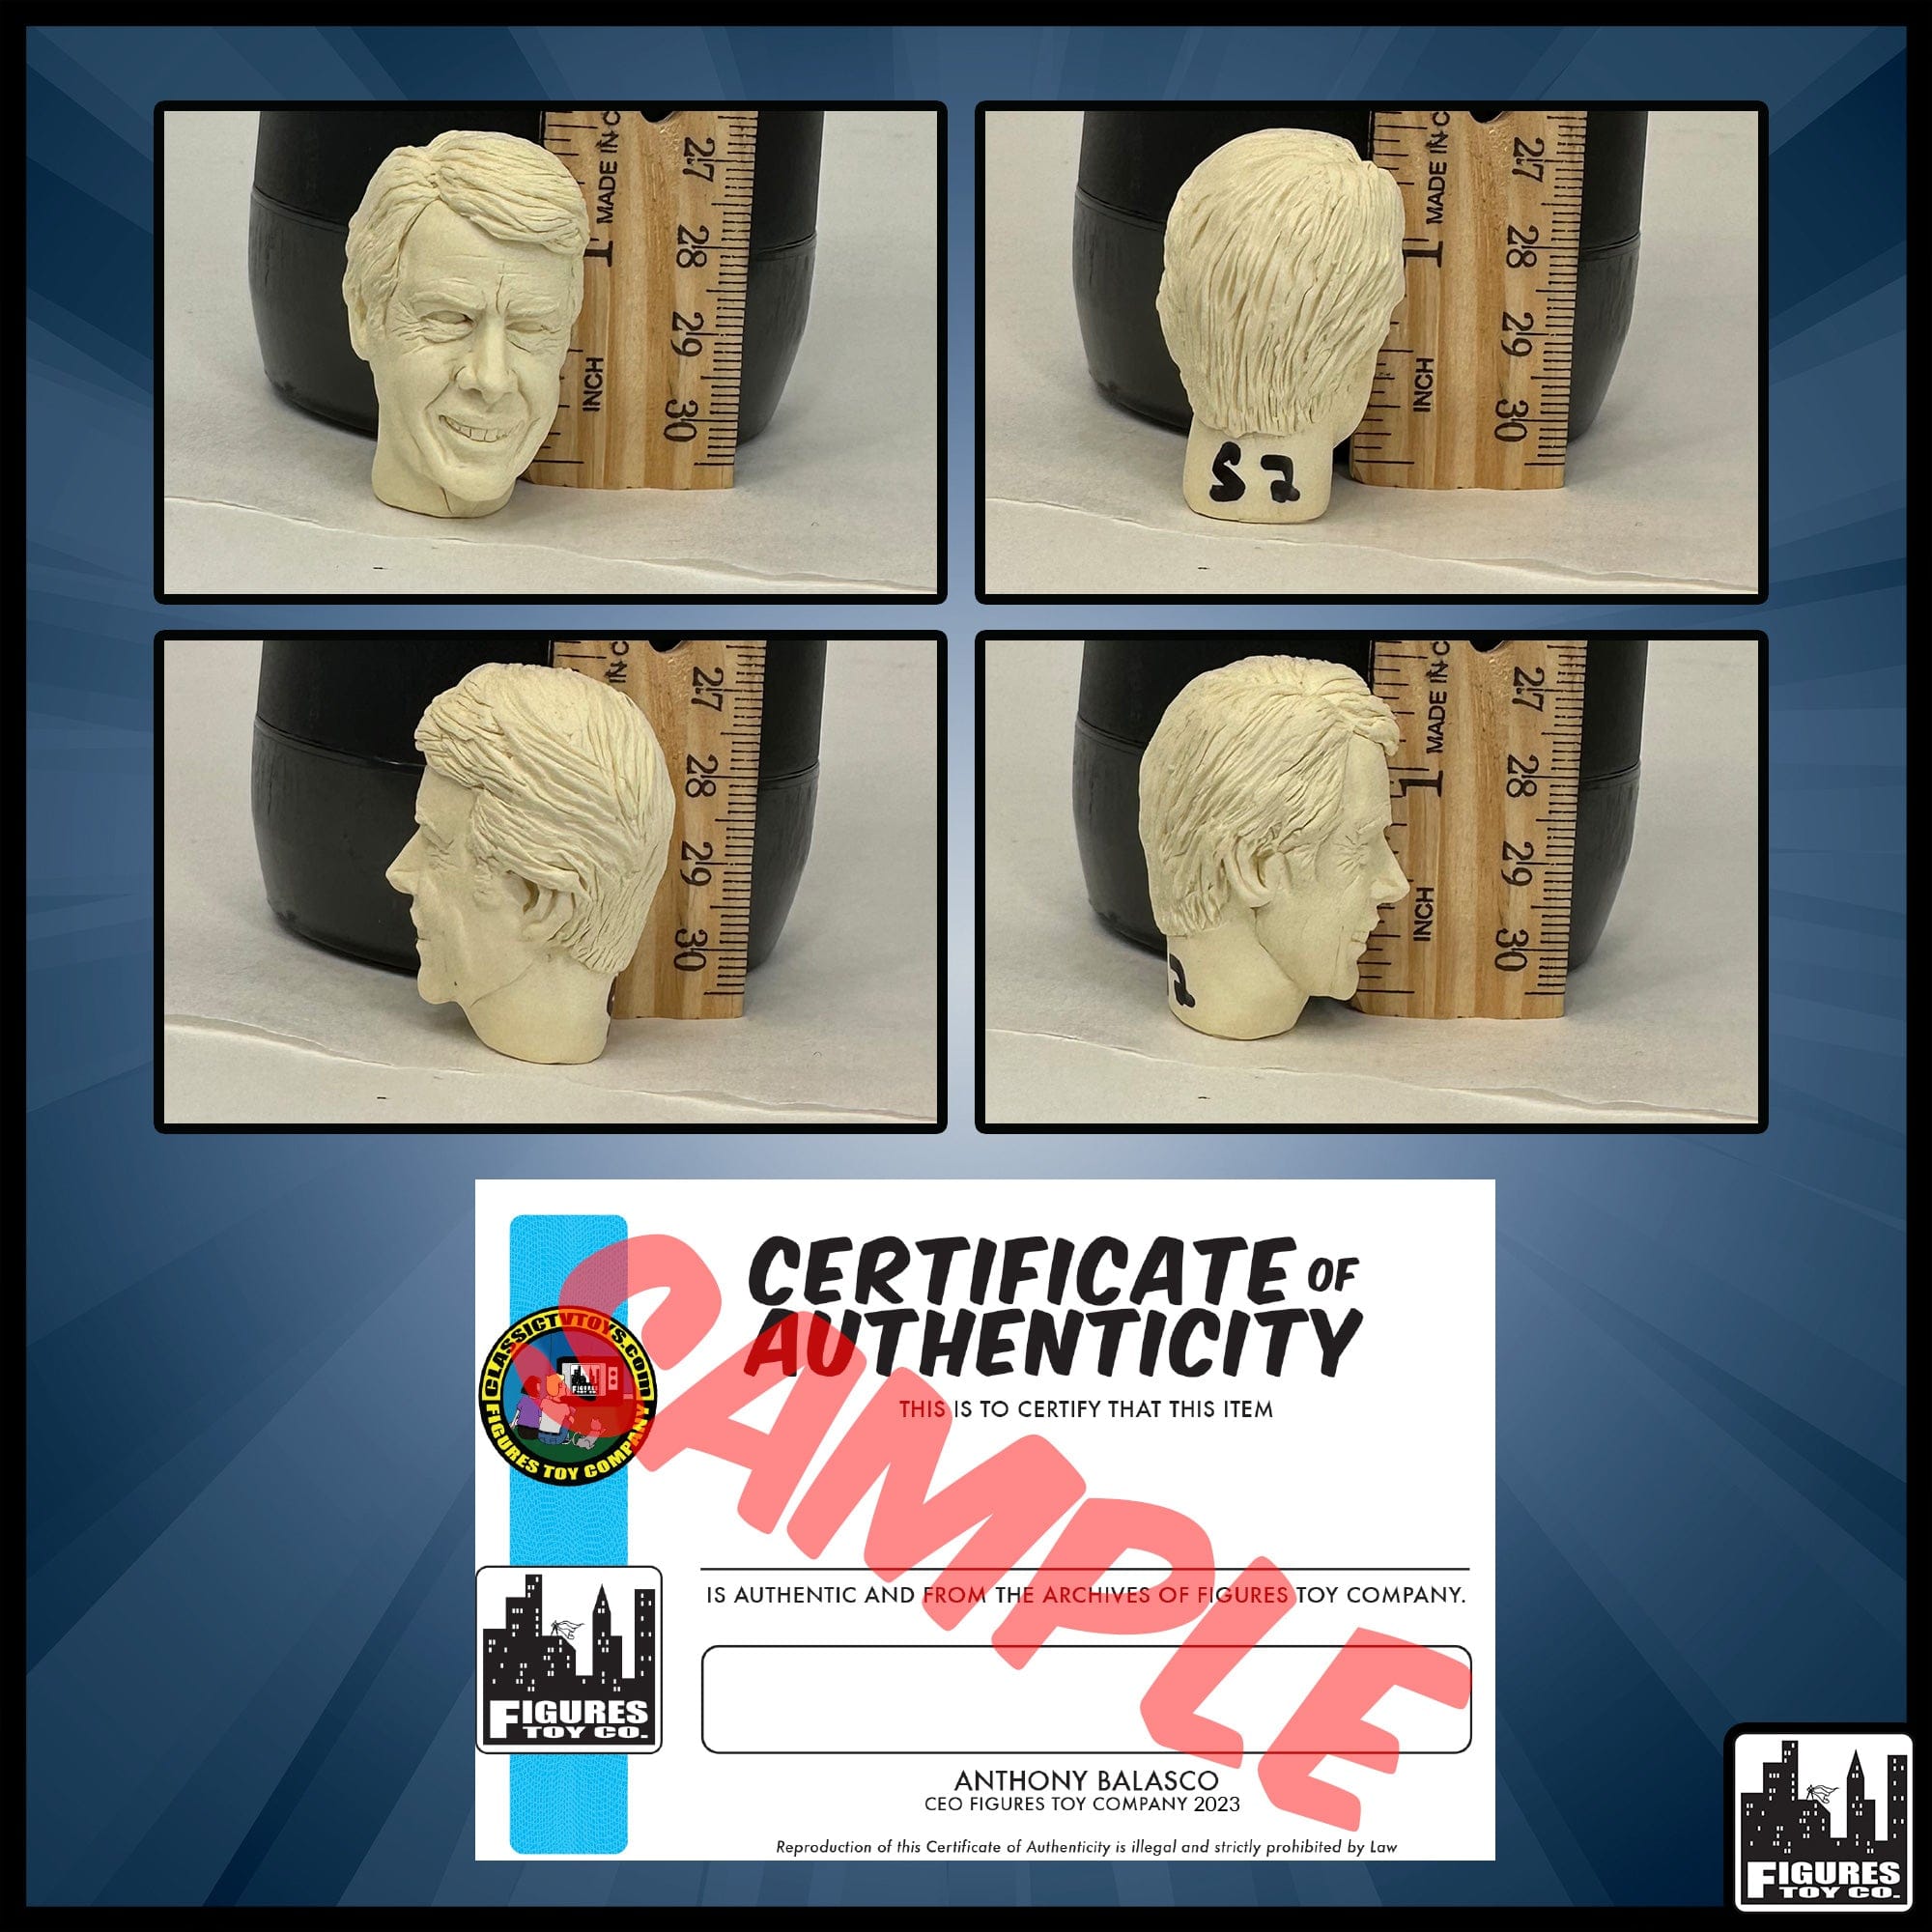 Resin Casted Jimmy Carter Head